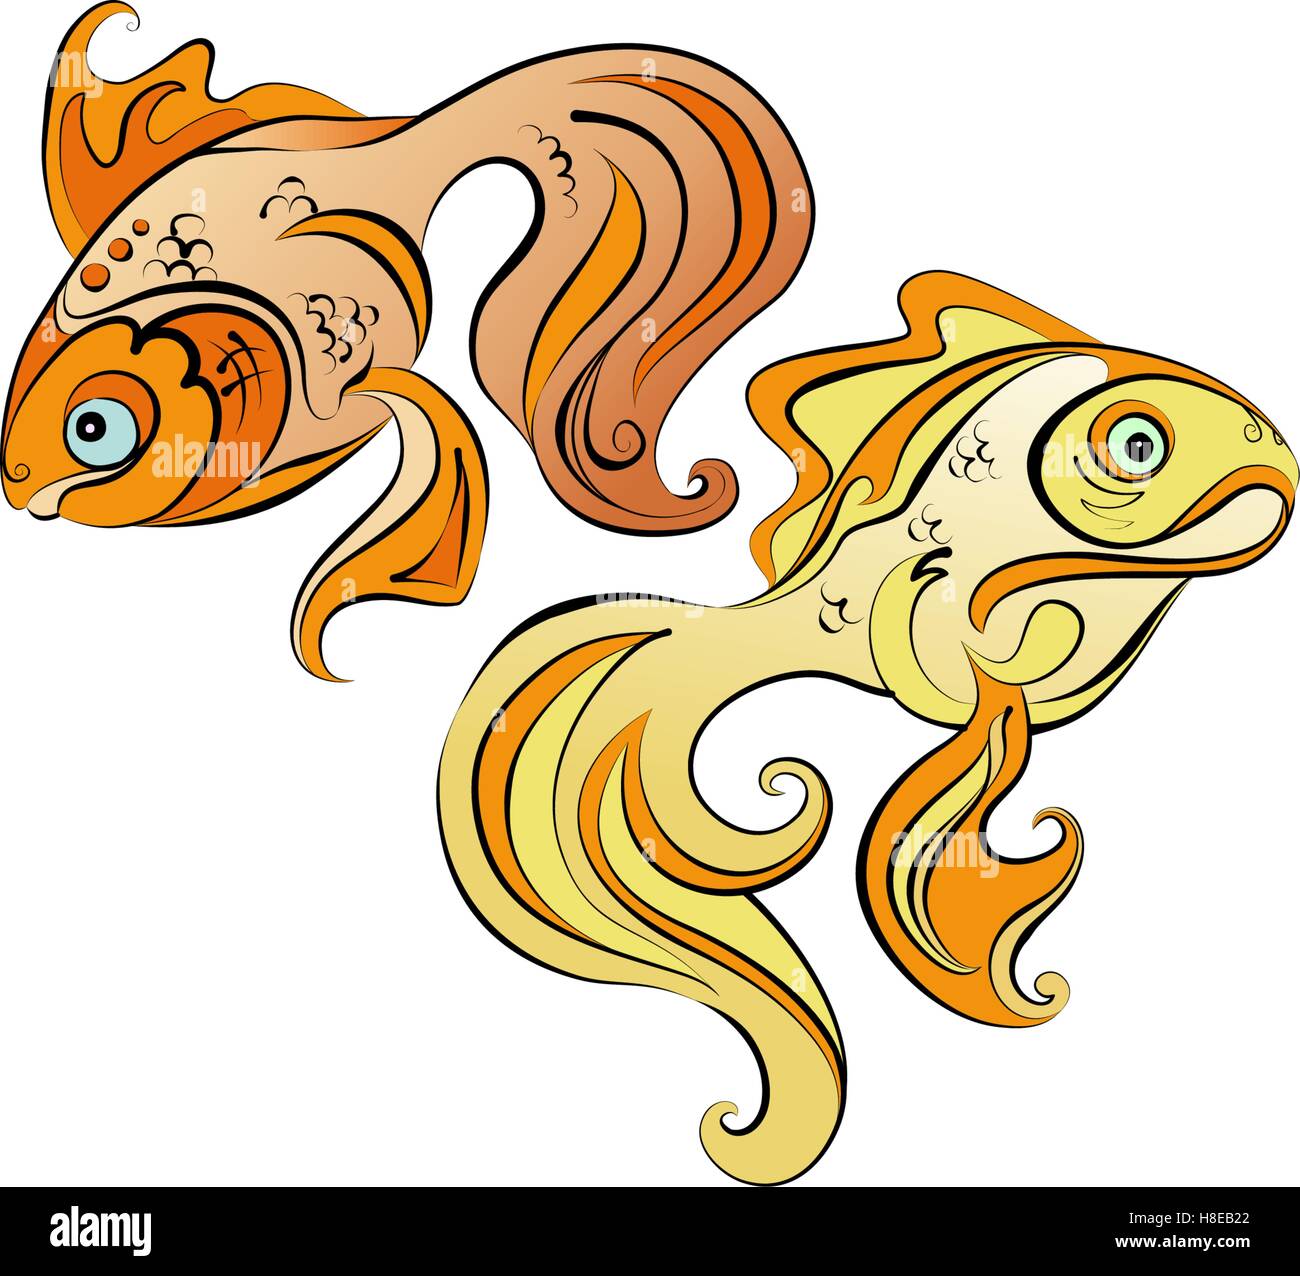 Illustration of two stylized gold fish on white background Stock Vector